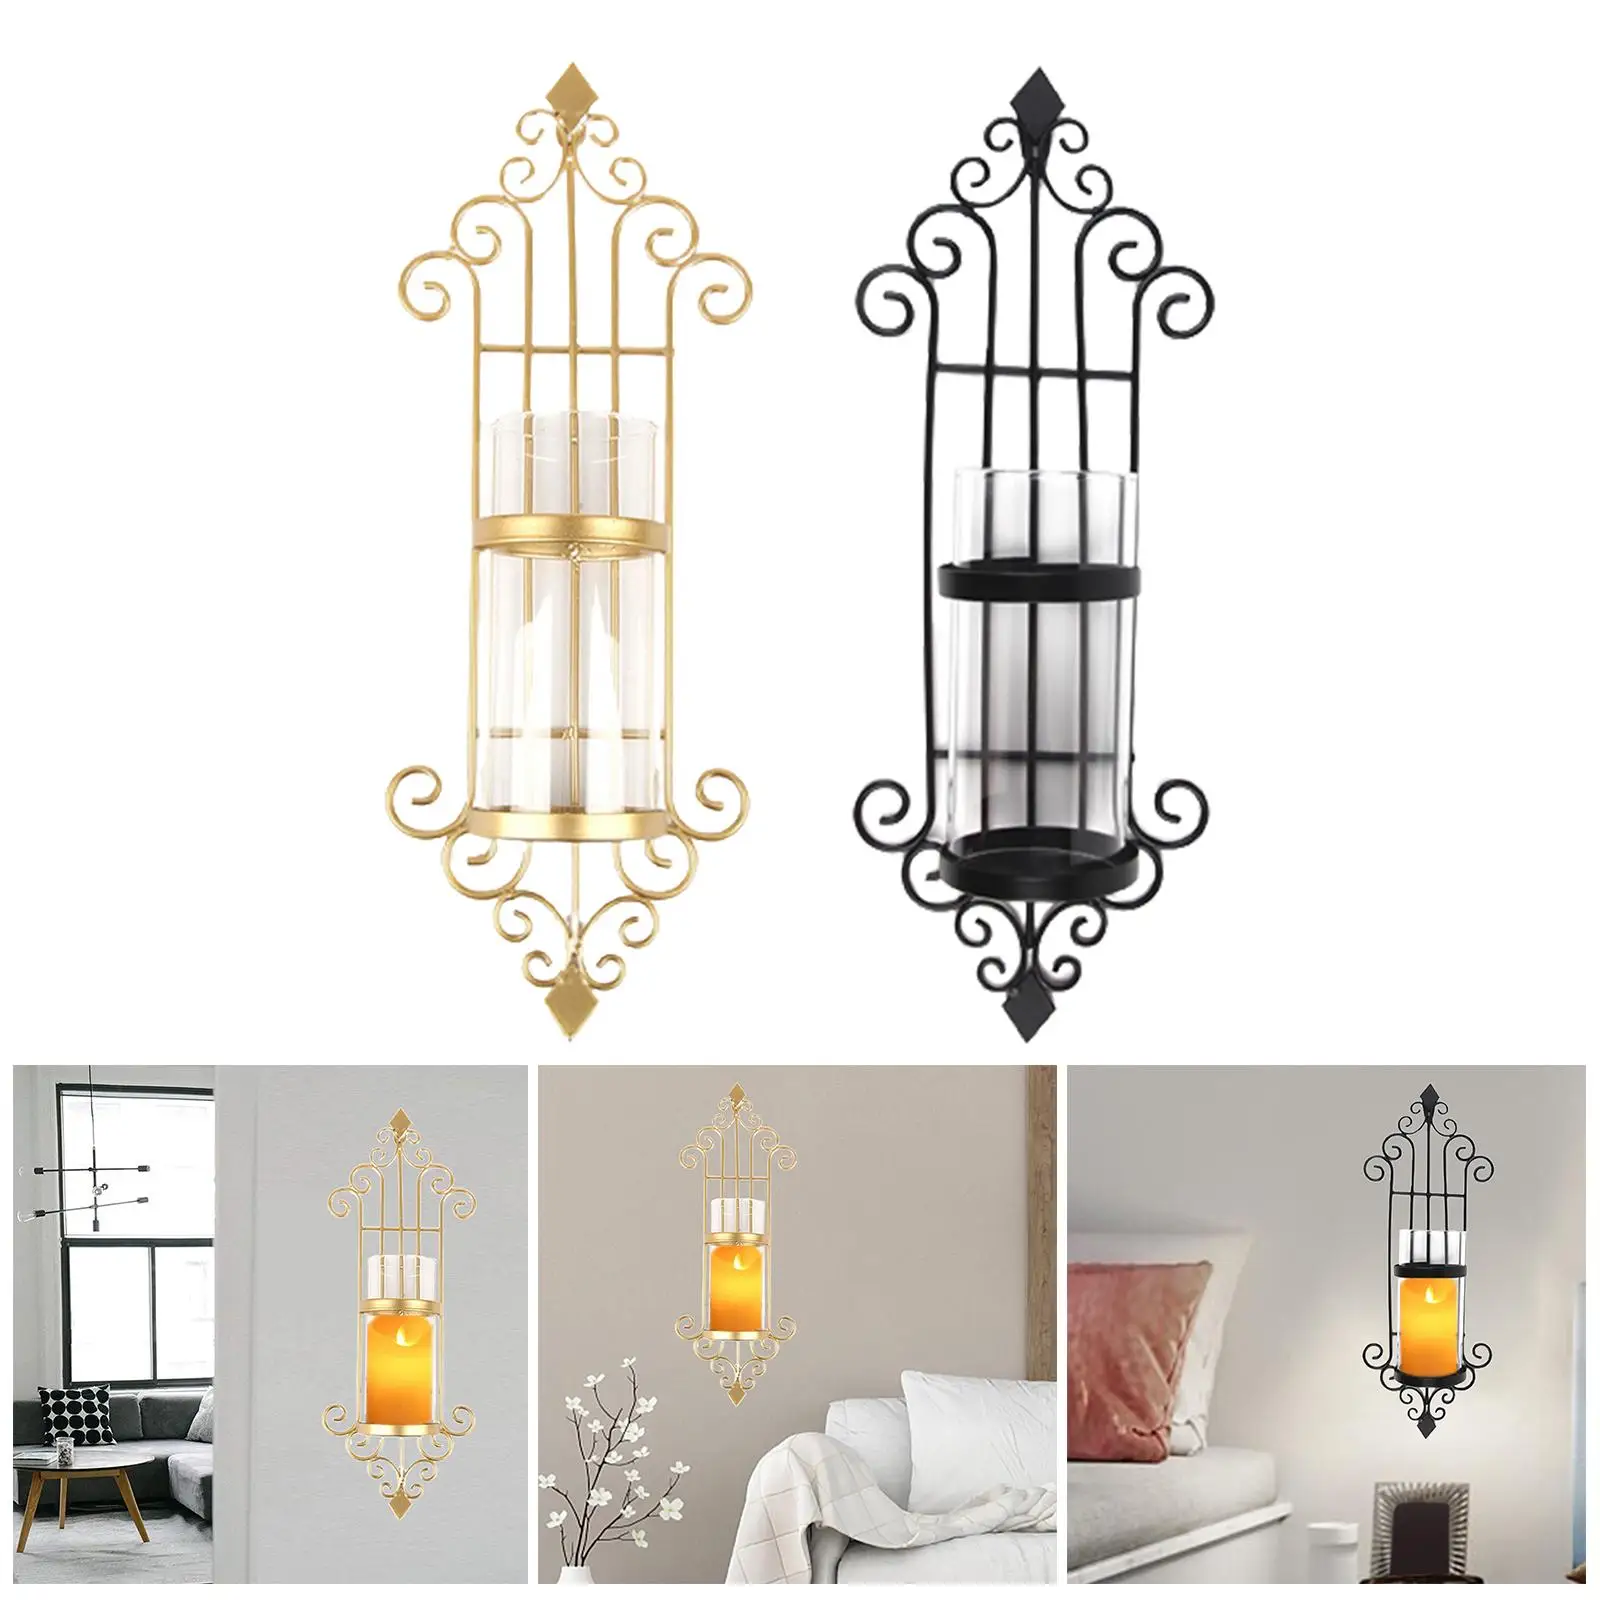 2PCS Iron Candle Sconce Holder Hanging Wall Mounted Pillar Decor for Bedroom Dining Room Living Room Bathroom